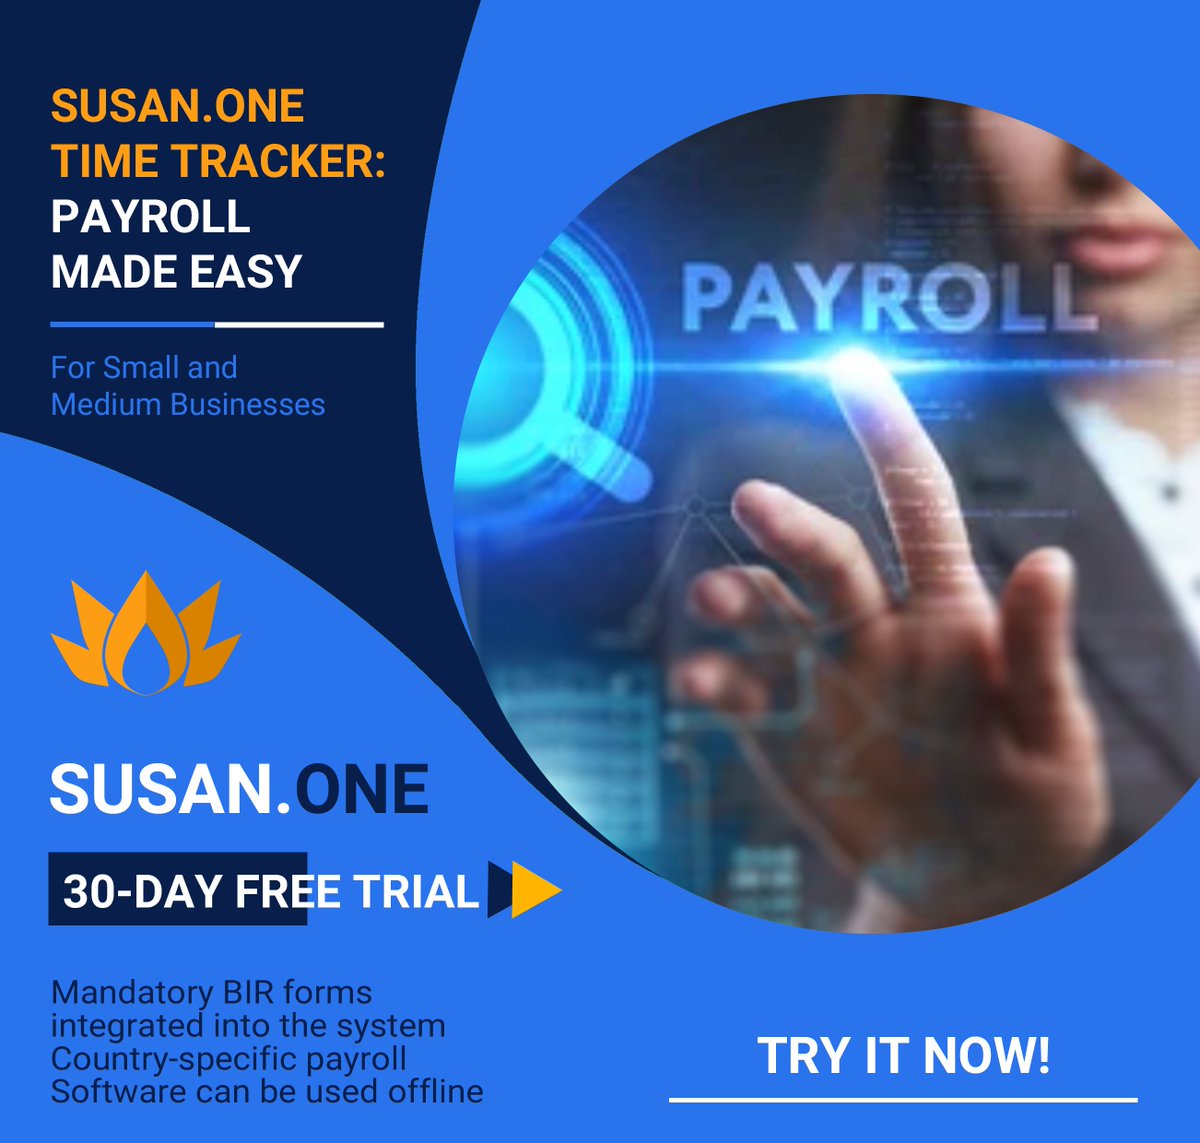 Track your employee's time activities and send data to payroll automatically.
Download the Susan.one Payroll software now - susan.one/susan-payroll
​​.
.
.
.
.
#organisation #work #timetrackingapp #timetracking #digital #timetrackingsoftware  #femaleenterepreneur